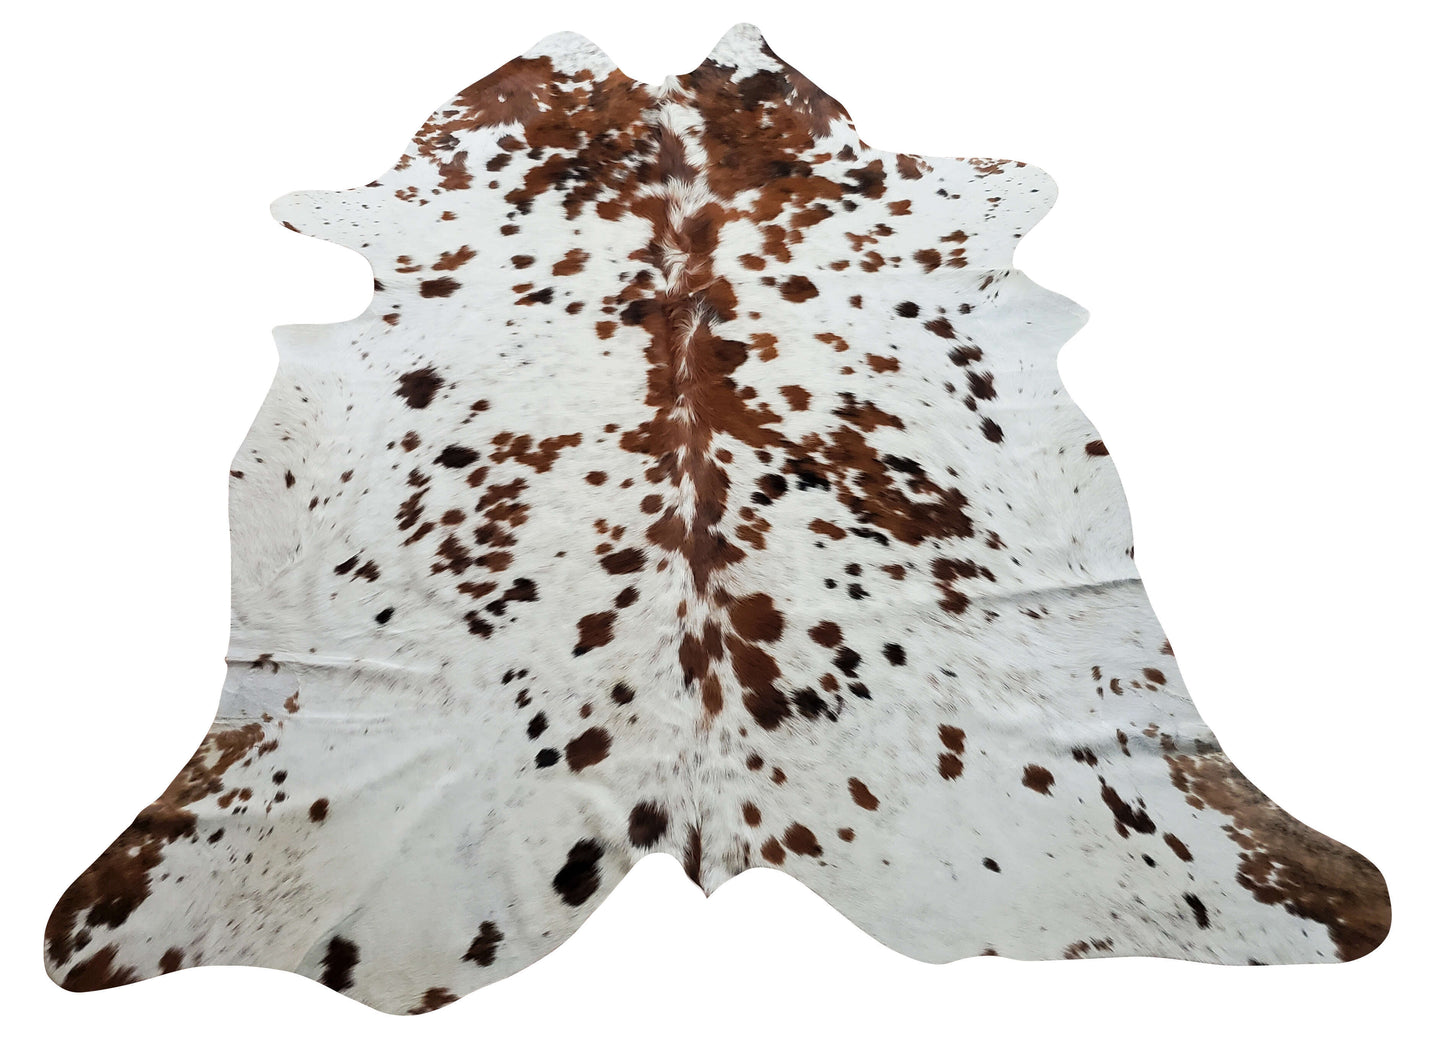 New addition in our xl cowhide rug, a very beautiful spotted pattern, these stunning cowhides are free shipping USA, perfect touch of western or rodeo